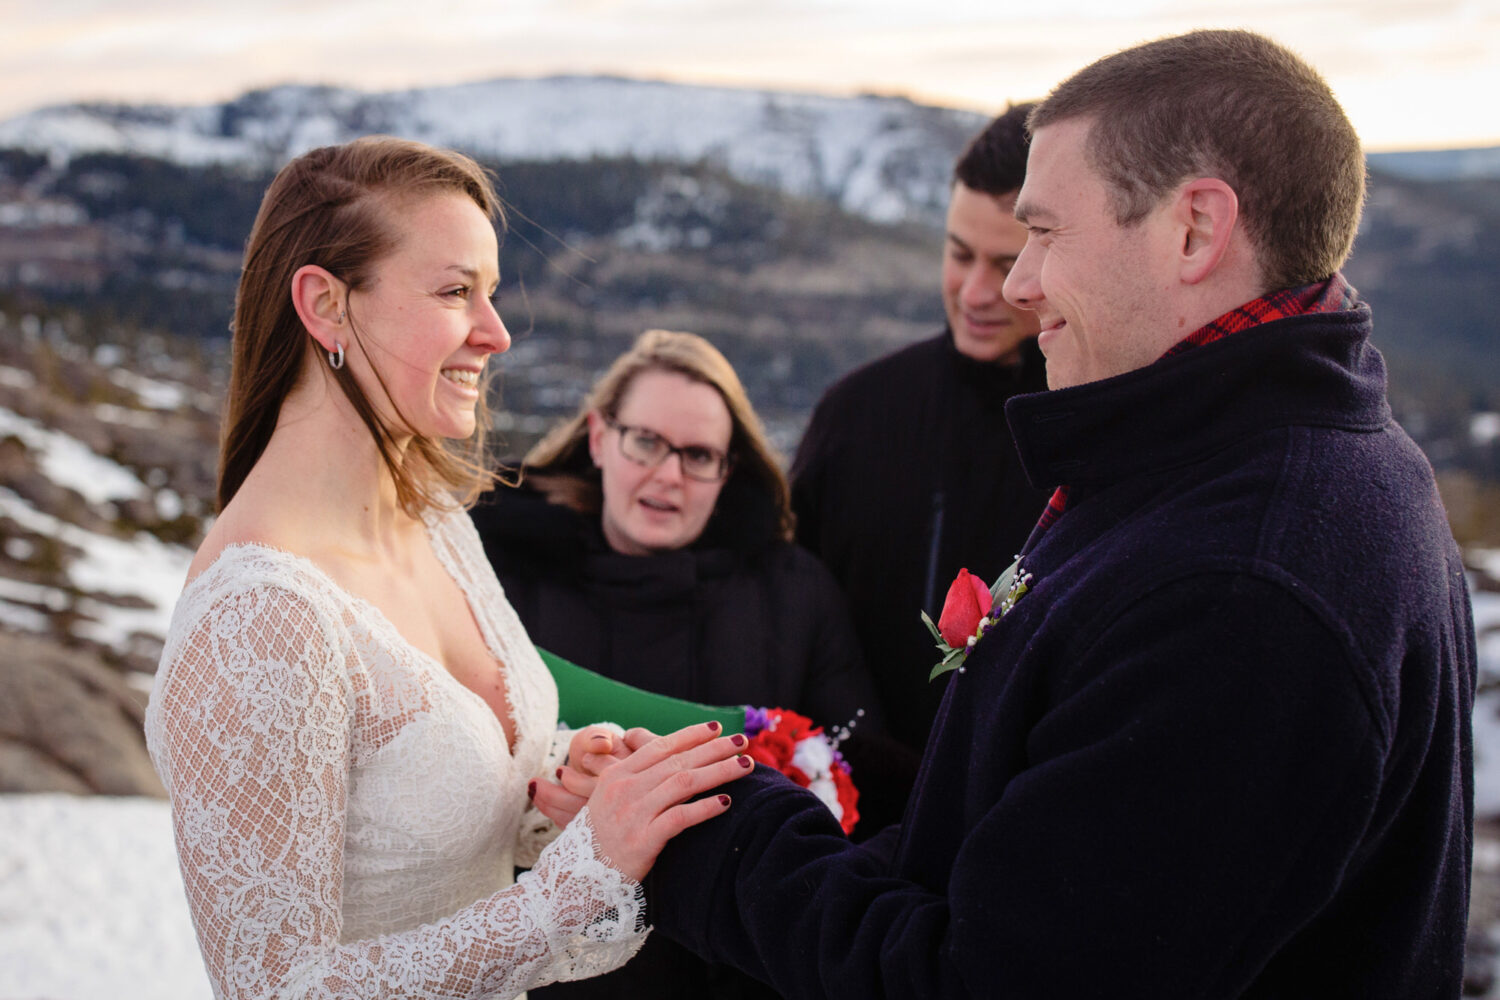 Getting married in the snow in Lake Tahoe during winter.